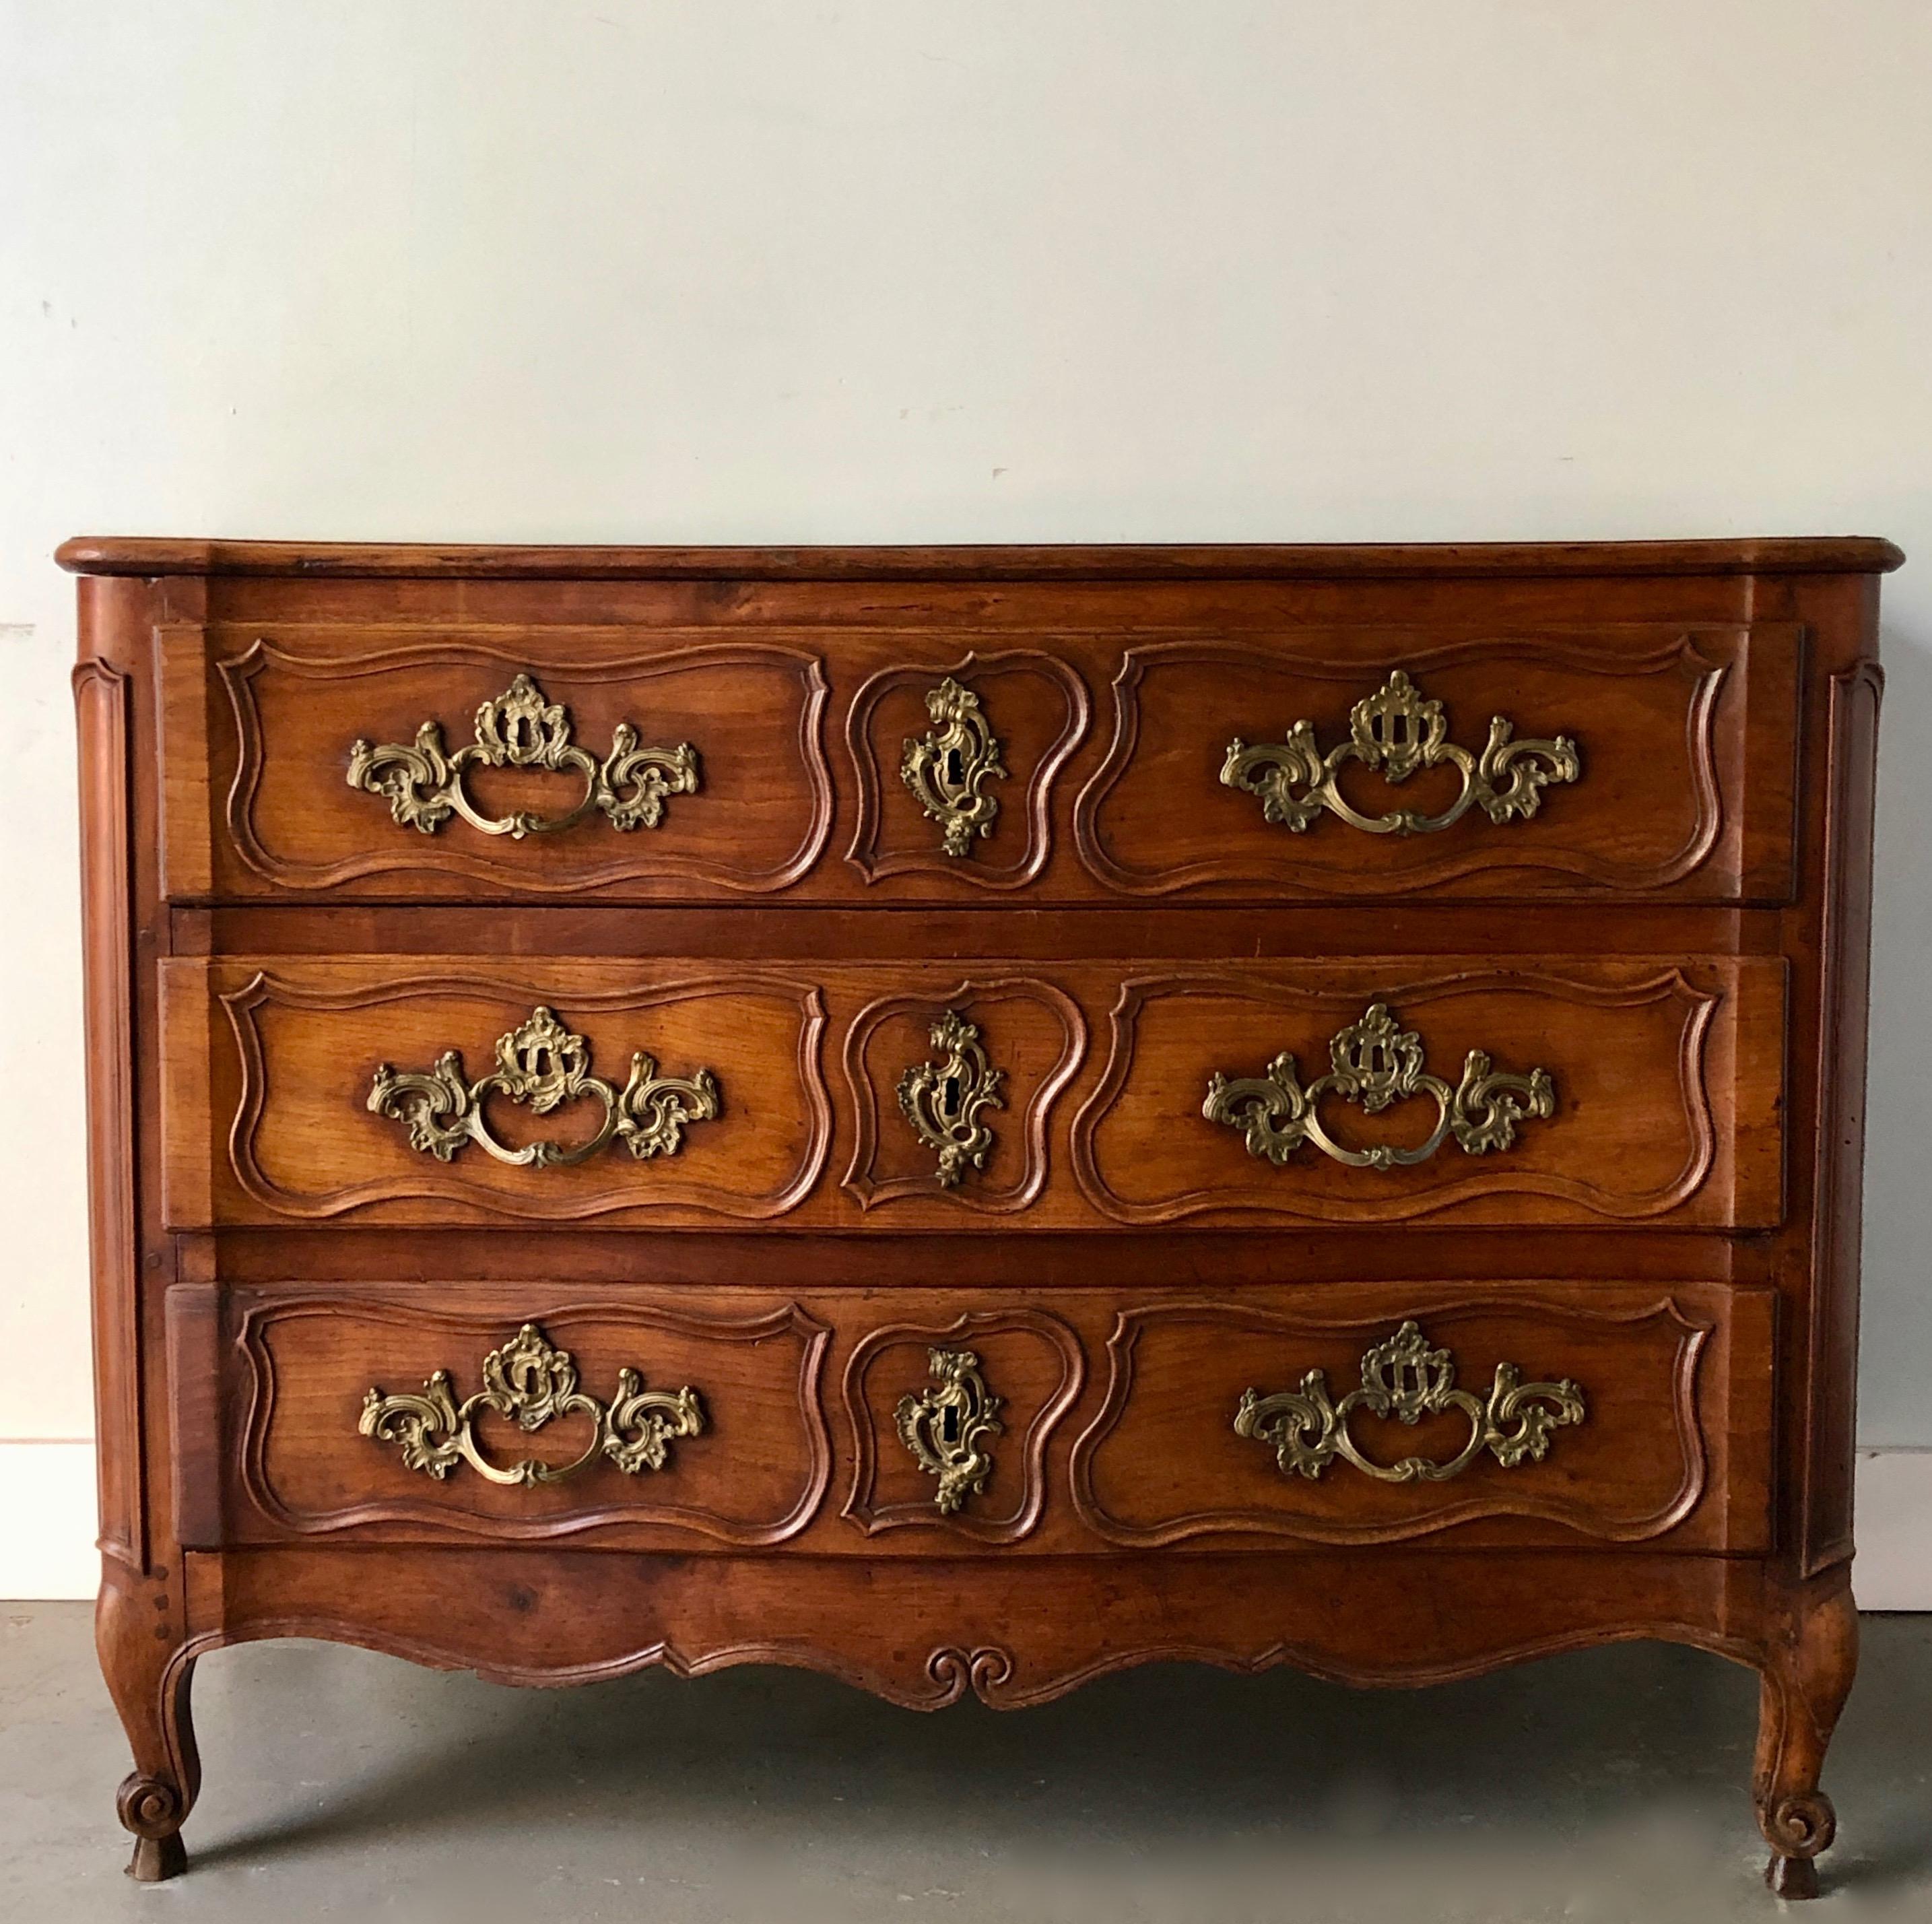 Beautiful and large, richly carved fine 18th century walnut commode with shaped top and three large drawer with original bronze hardware. One key,
circa 1750.
Vallée du Rhône, Valence France.